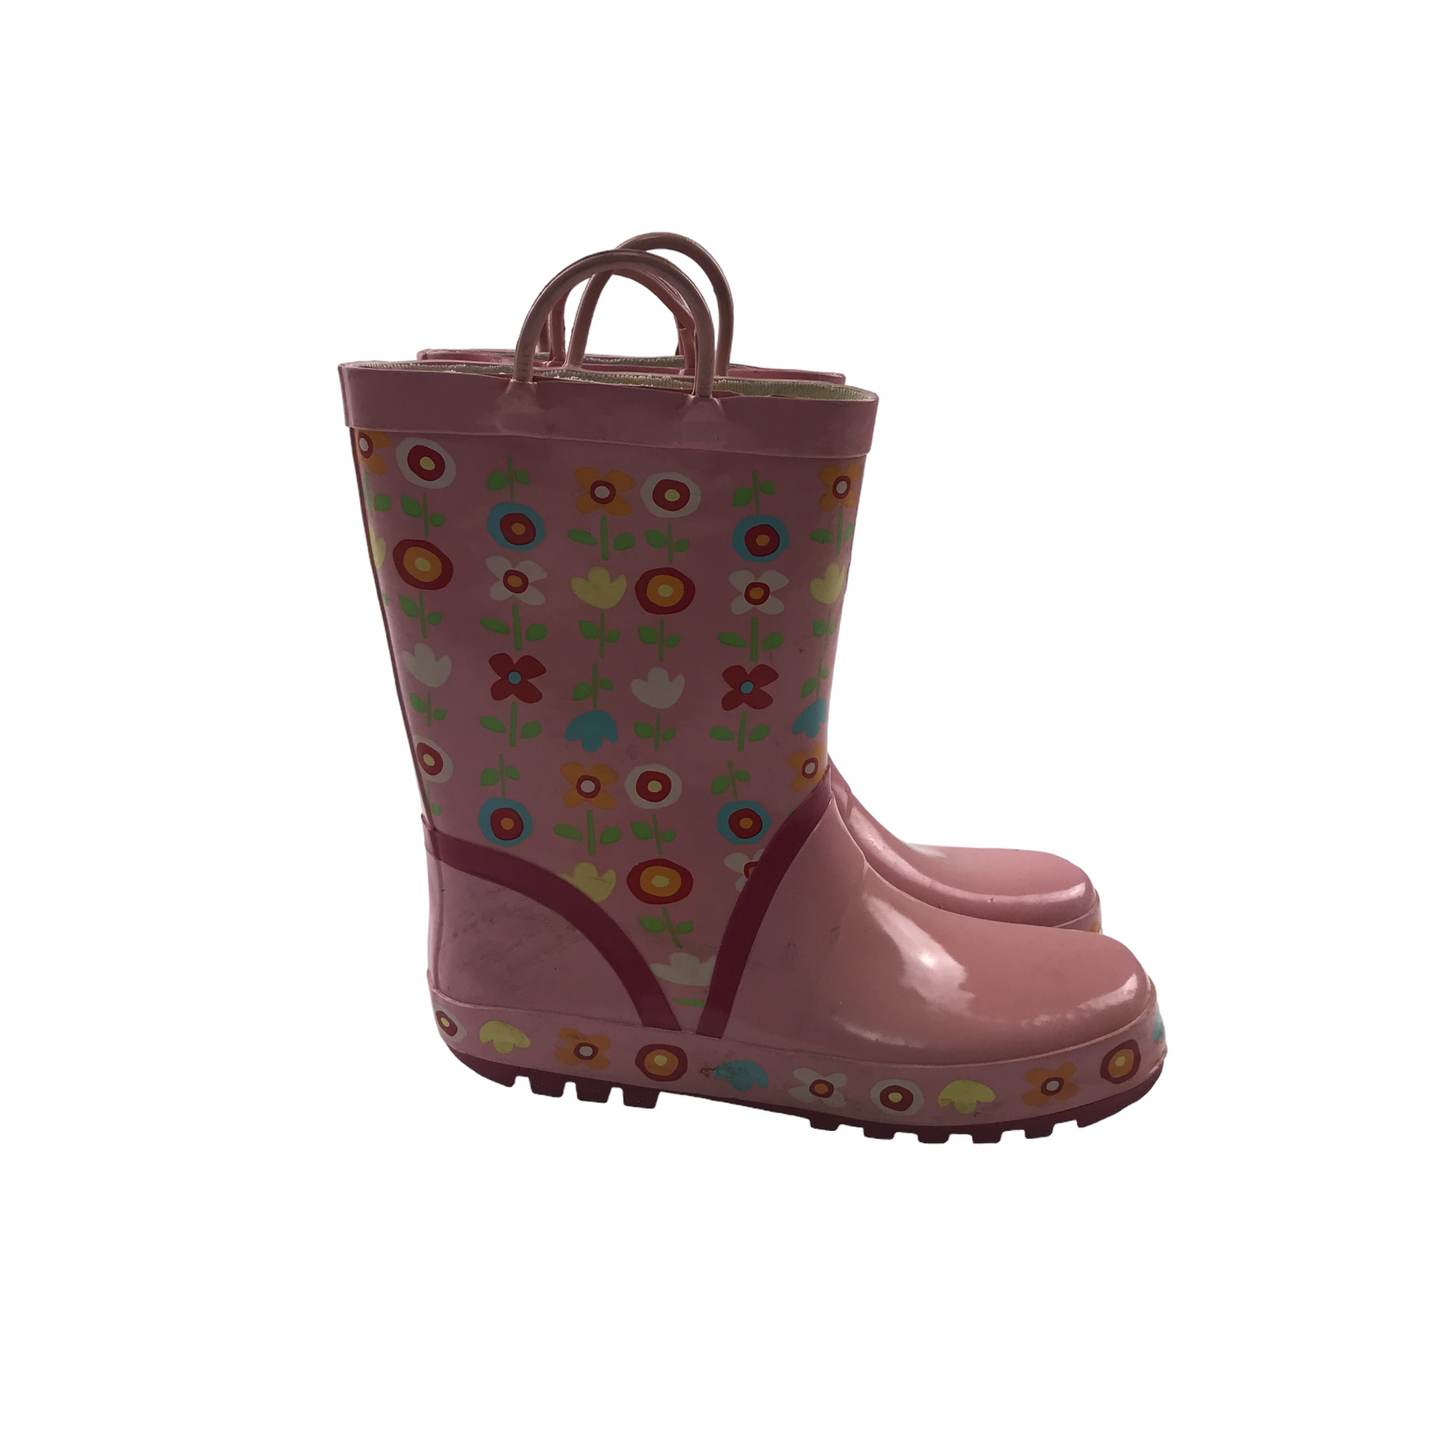 Pink Floral Wellies Shoe Size 1.5